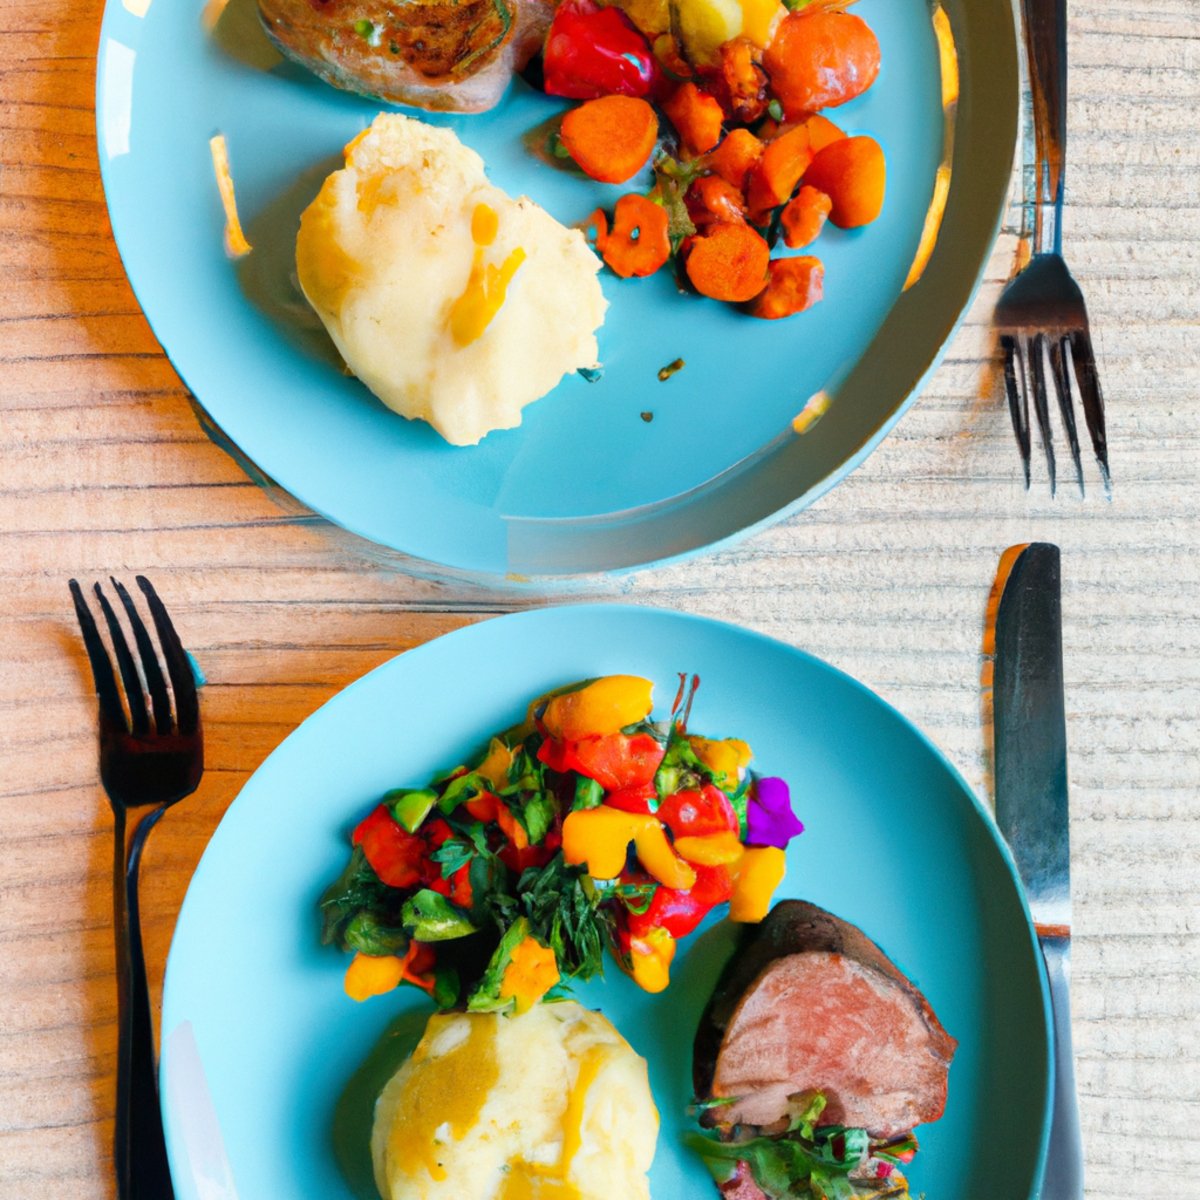 The photo shows two plates side by side, one filled with colorful fruits and vegetables, and the other with a juicy steak and a side of mashed potatoes. The vibrant colors of the plant-based plate pop against the neutral tones of the meat-based plate. A fork and knife are placed on each plate, ready to be used. In the background, a wooden table and a white tablecloth can be seen, adding a touch of elegance to the scene. The photo perfectly captures the debate between plant-based and carnivorous diets, showcasing the stark contrast between the two options.